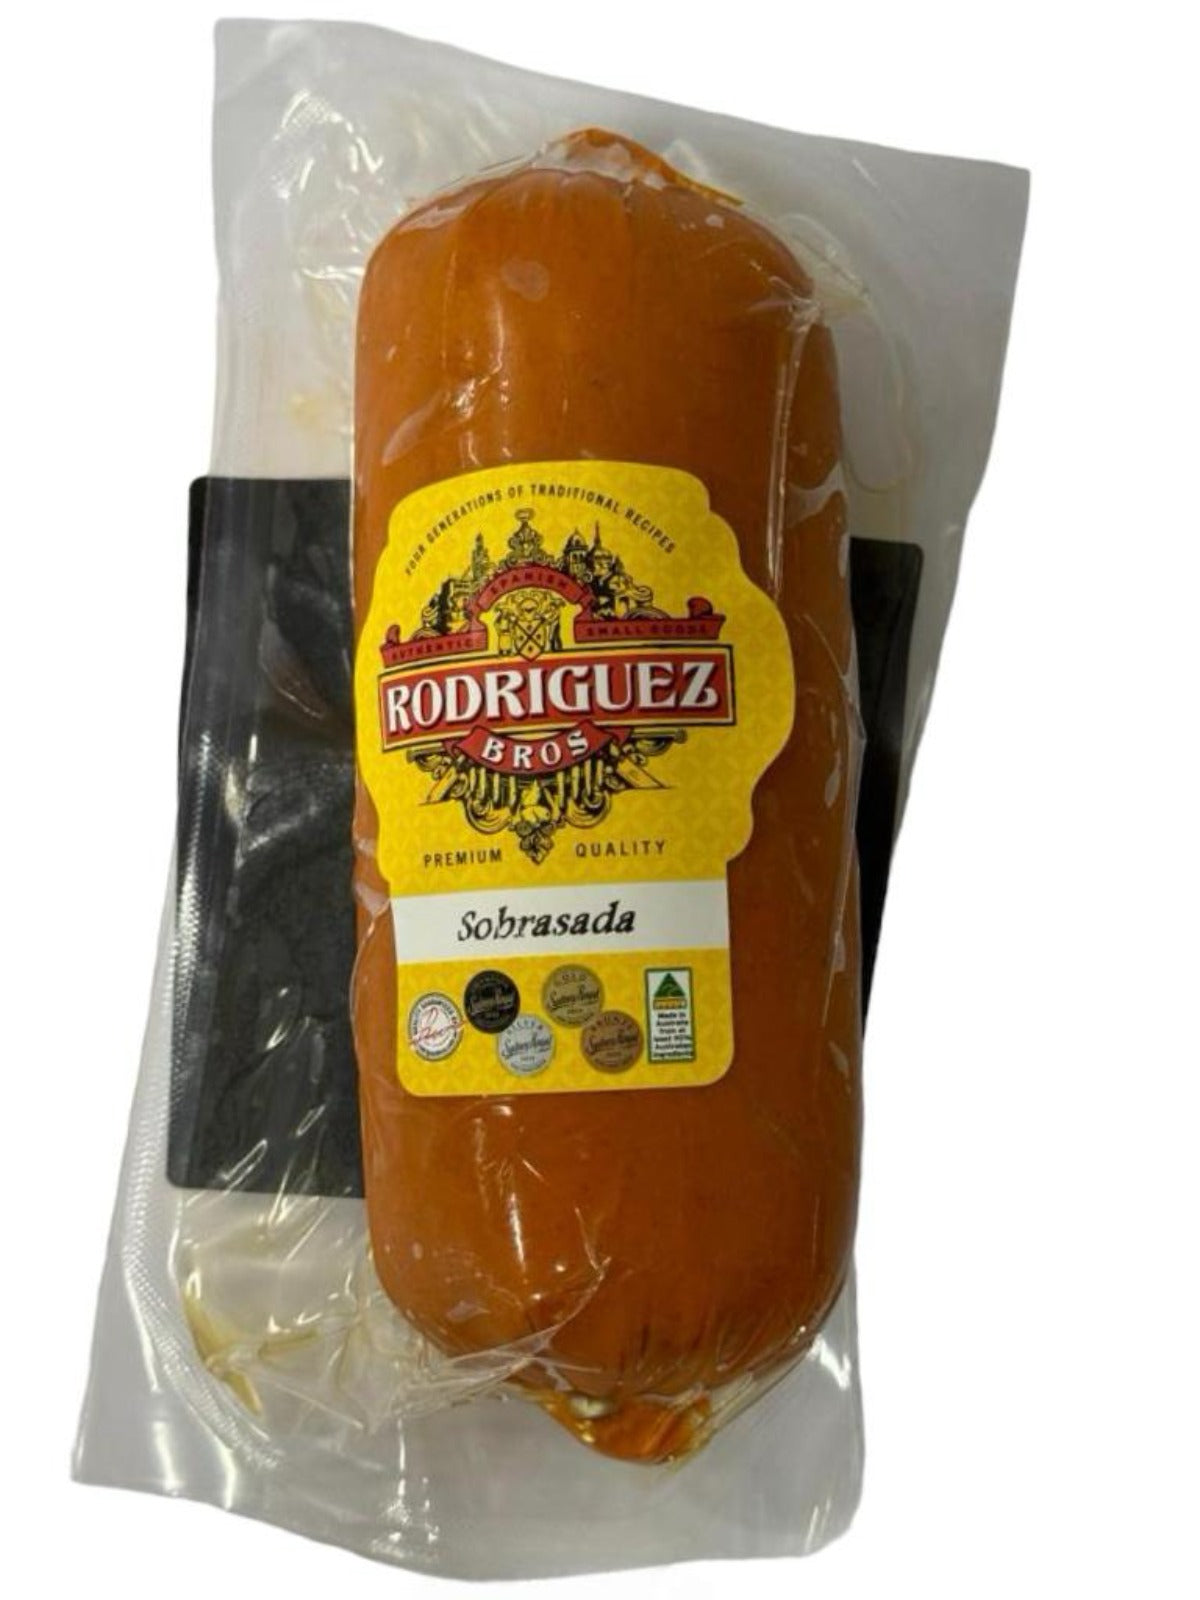 Sobrasada Random weight approx. 360g packet regular price $7.00 AUD. You are guaranteed to receive at least 350g of product, equivalent price of $20.00 per kg.